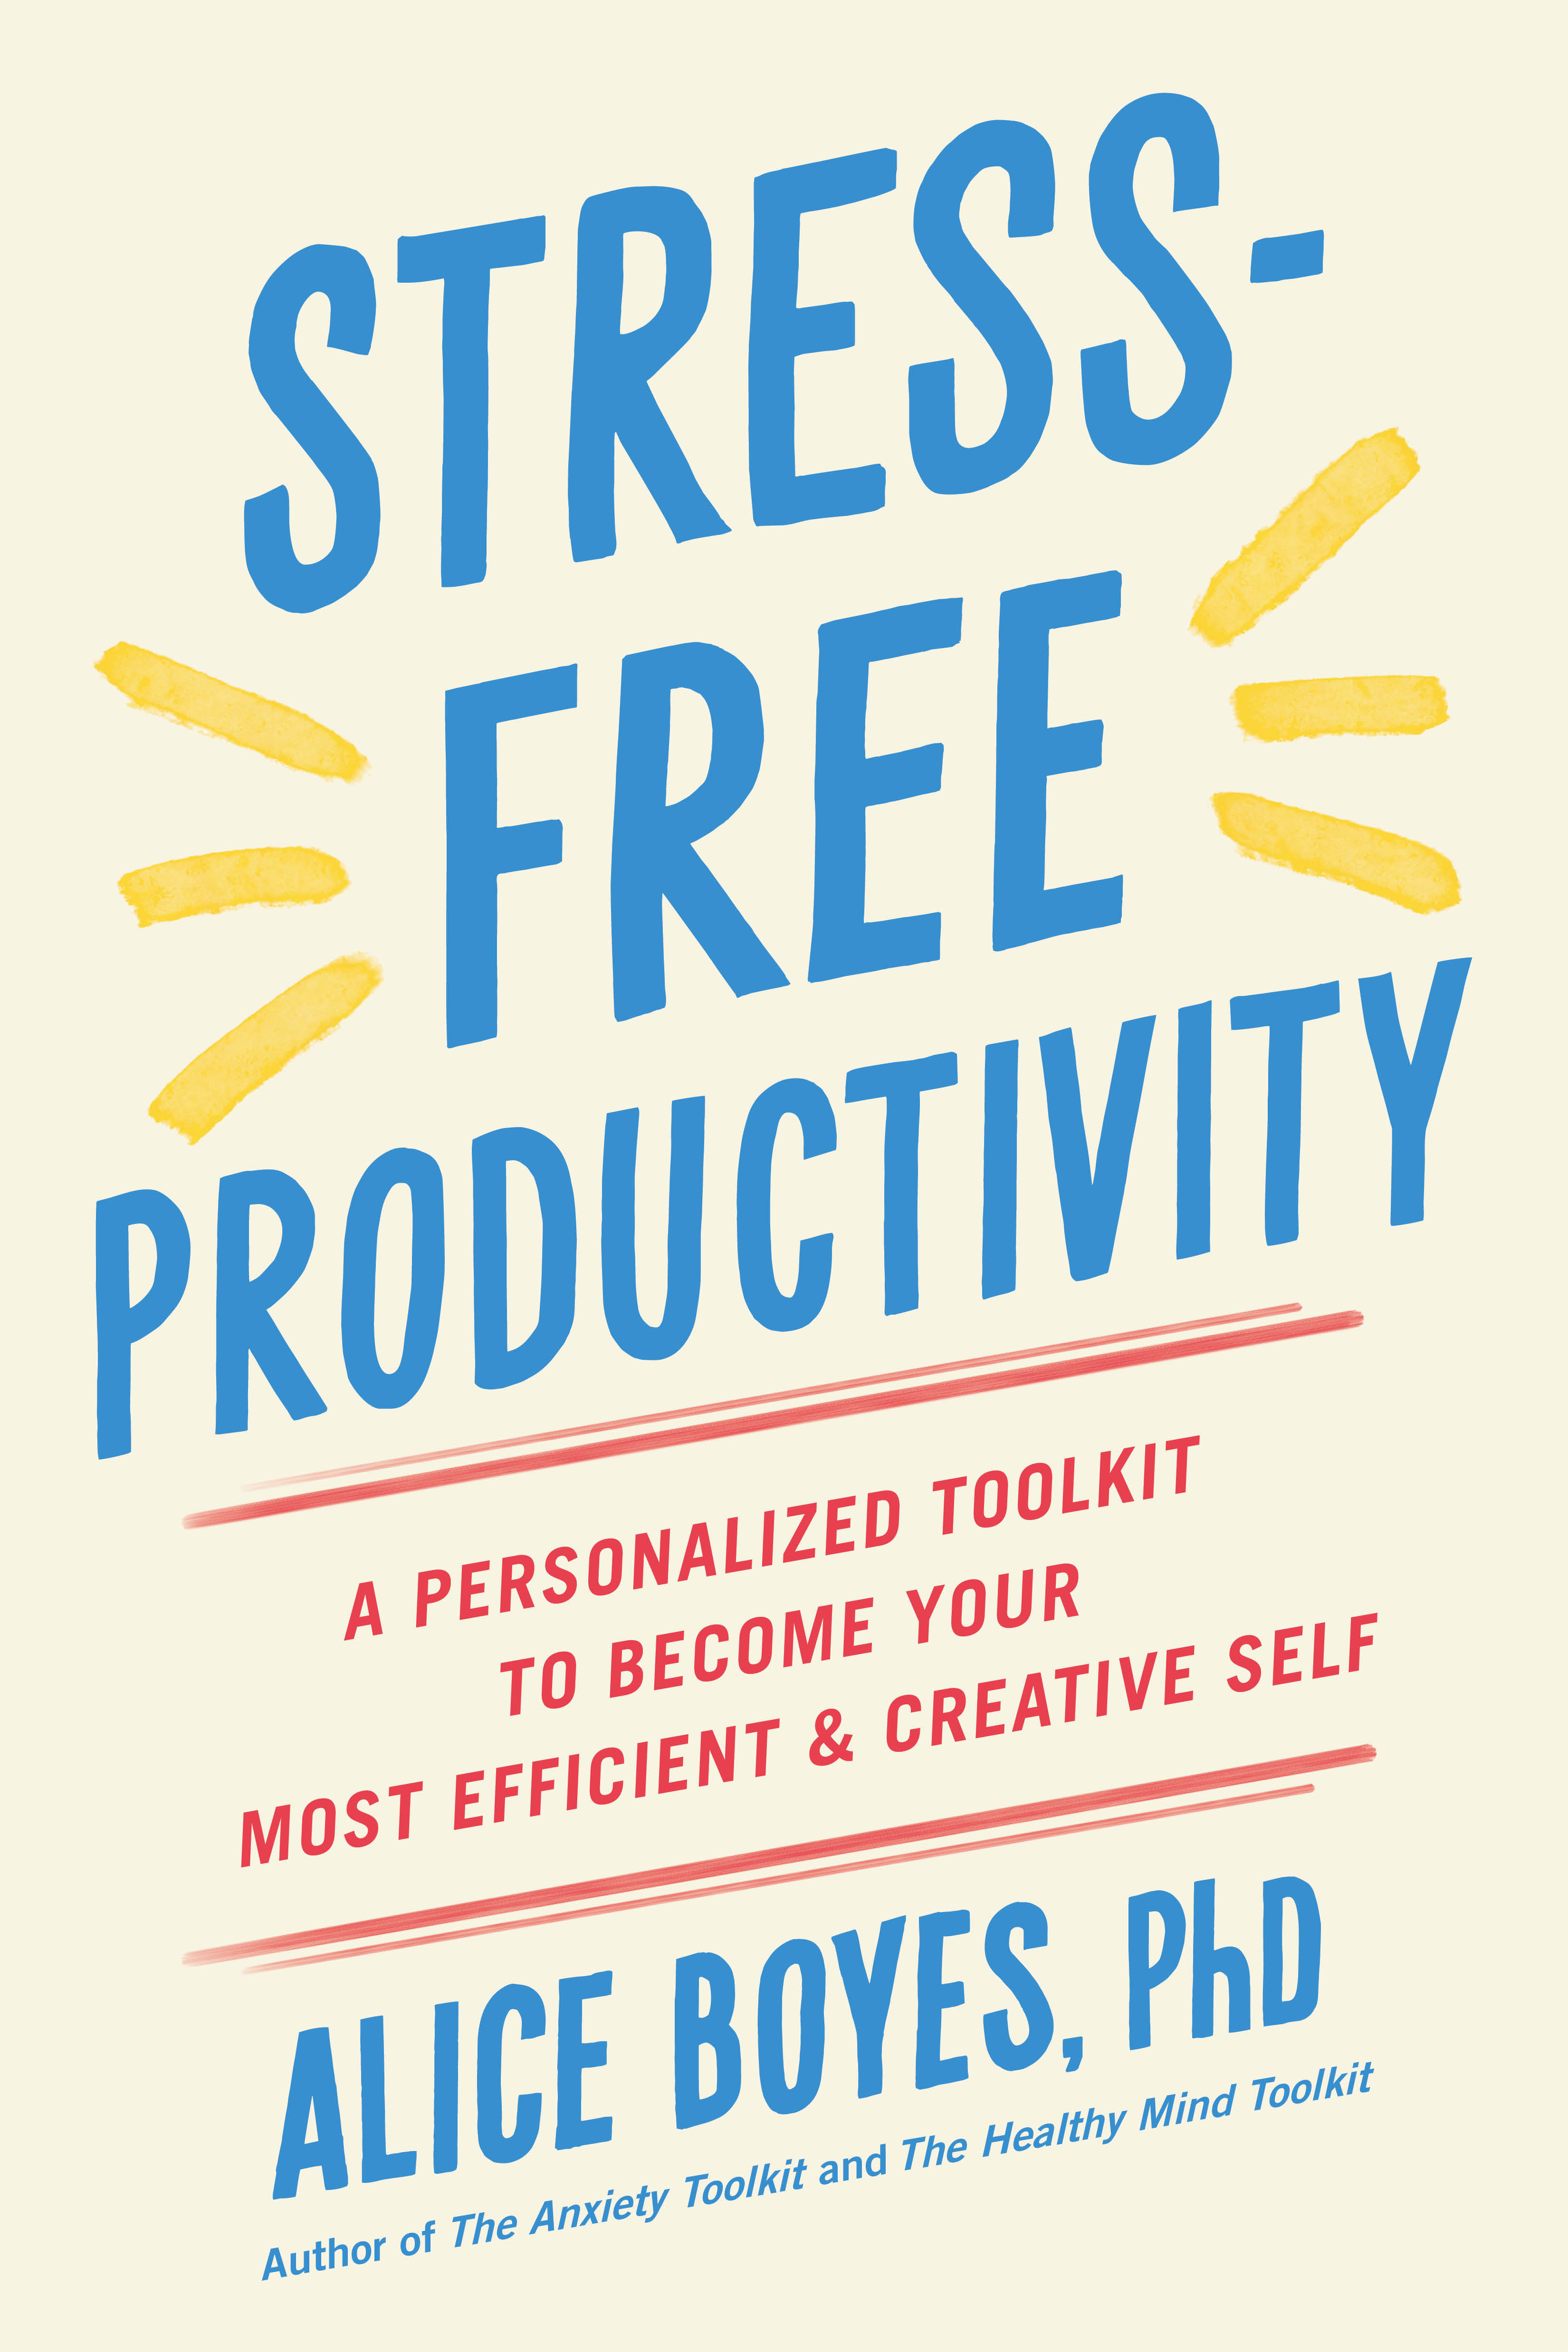 Stress-Free Productivity : A Personalized Toolkit to Become Your Most Efficient and Creative Self | Boyes, Ph.D, Alice